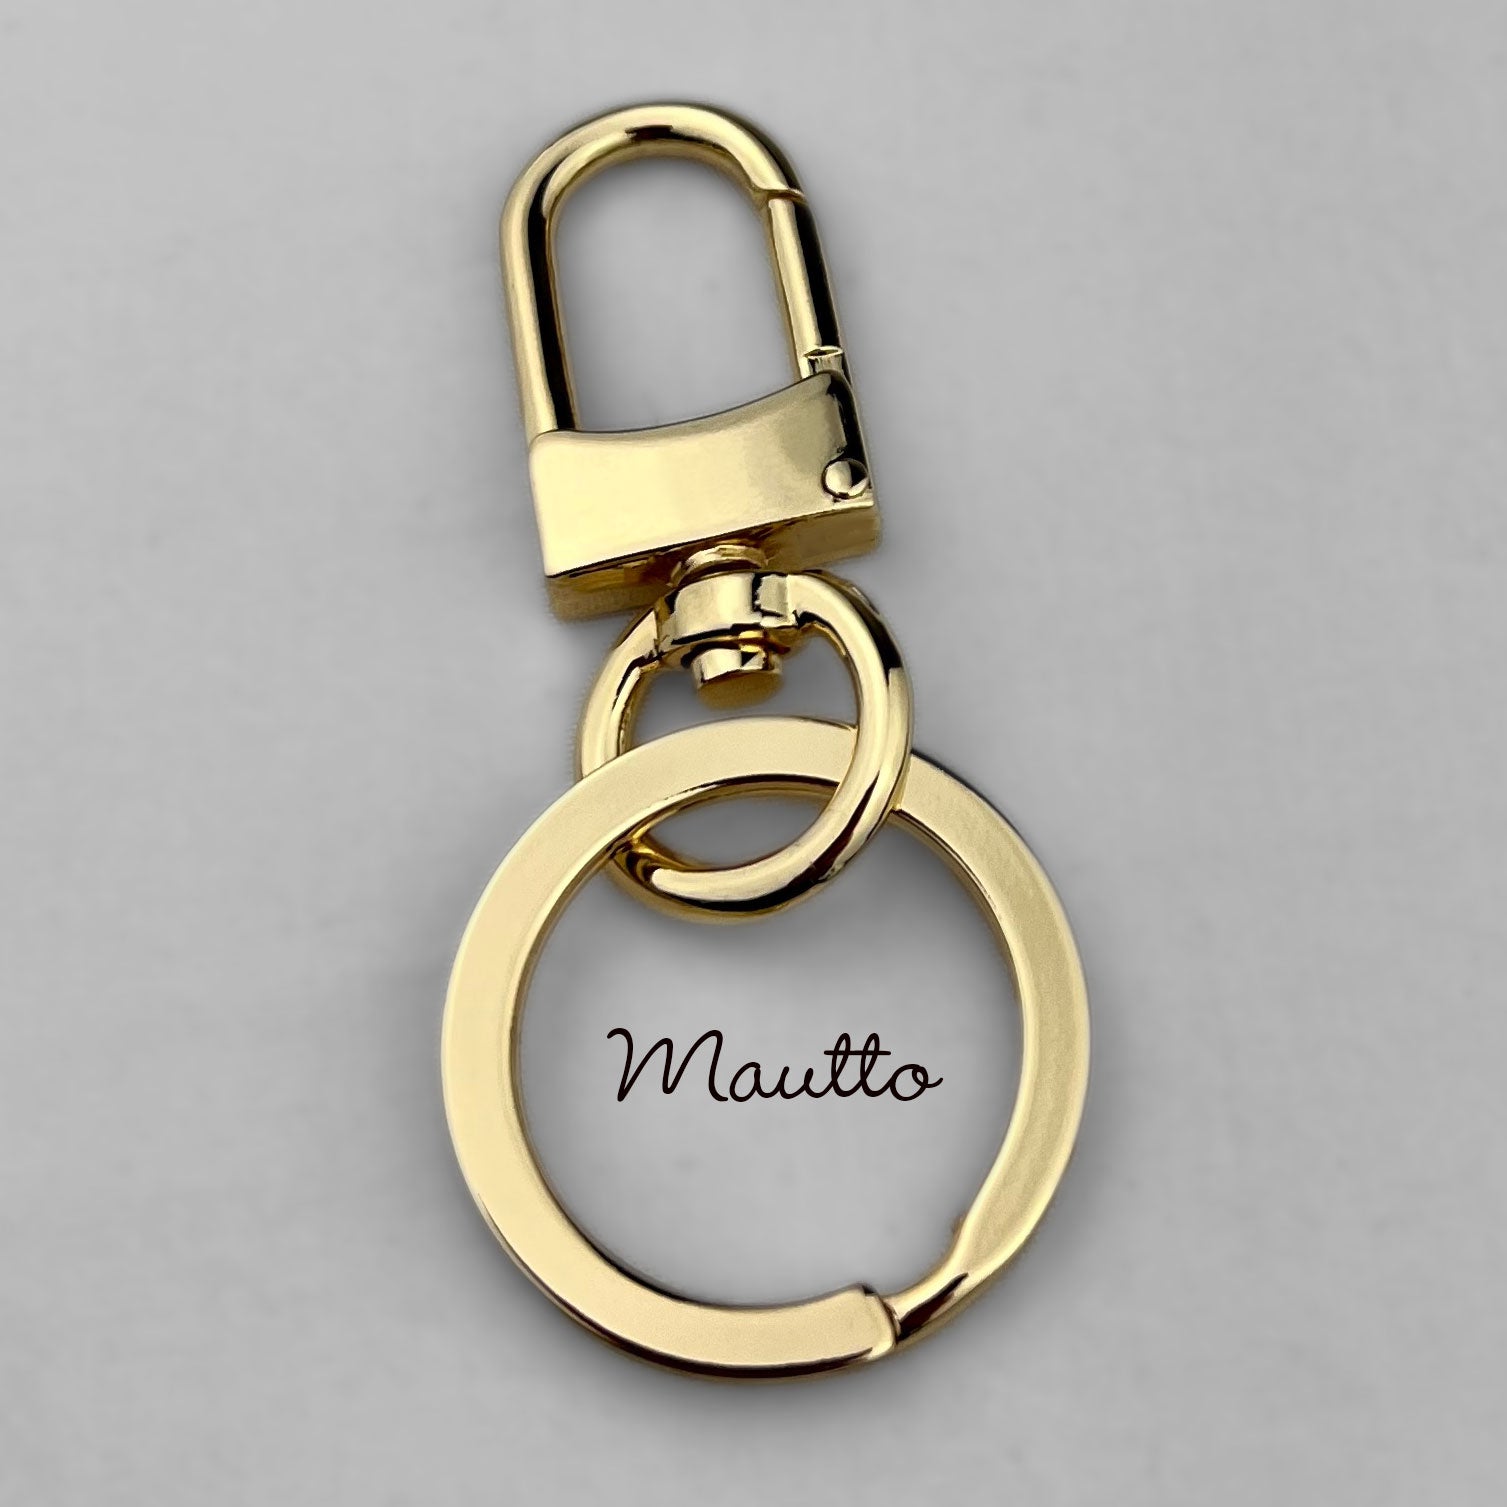 Mautto Key Ring/Chain Accessory with Swiveling Clip - LV Key Accessory Gold-Tone